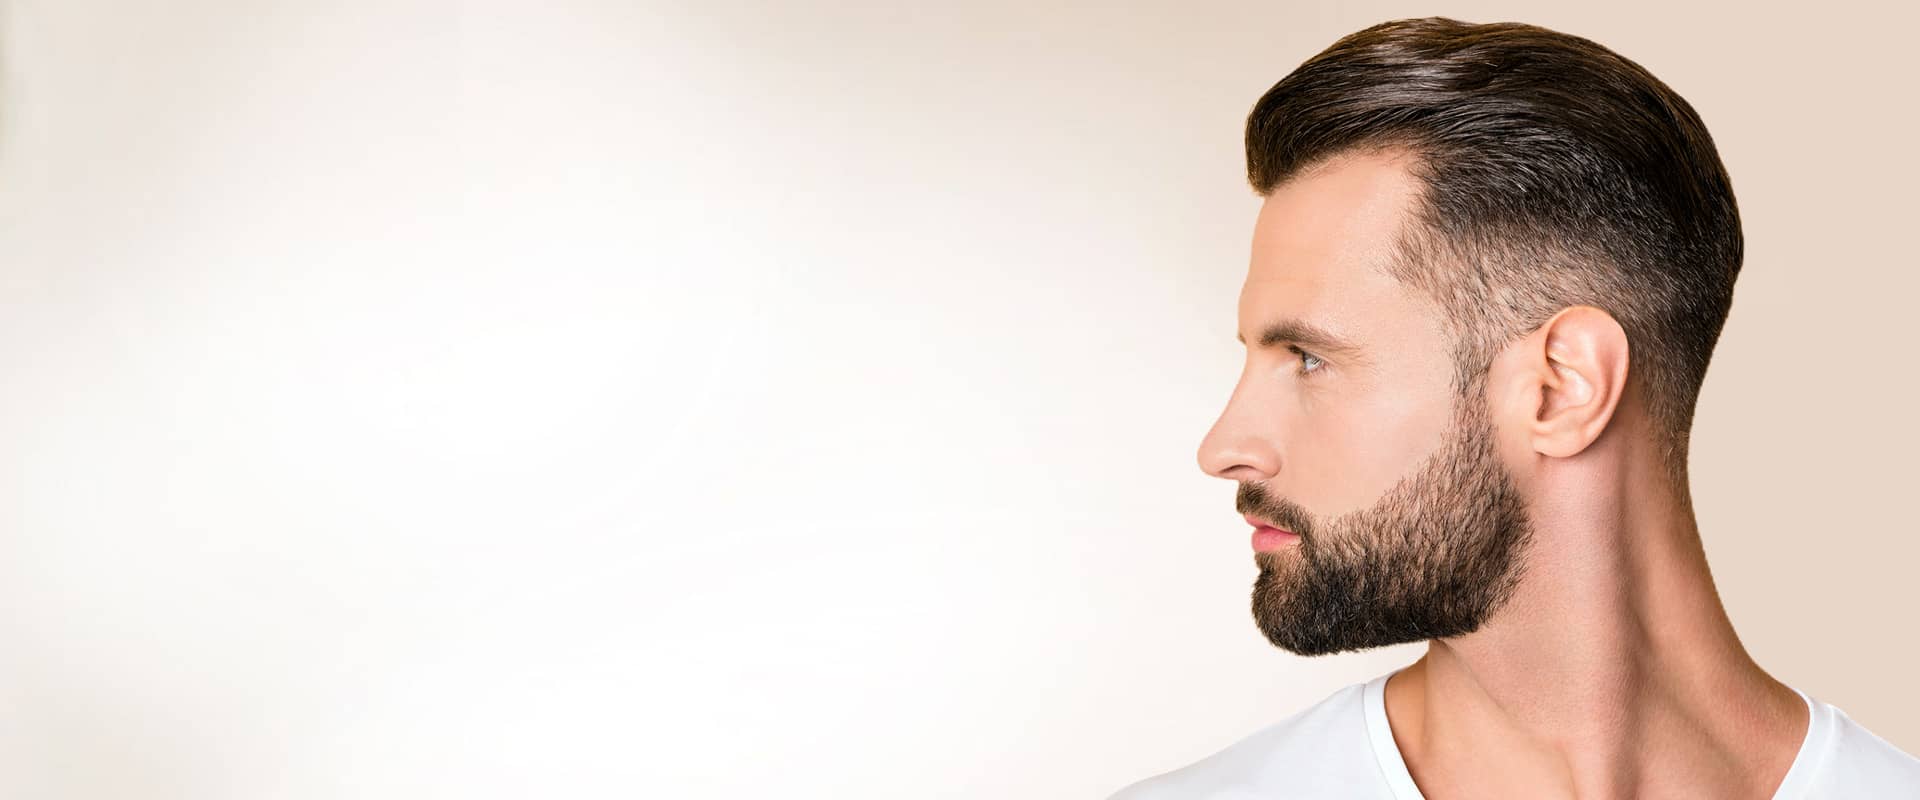 FUE hair restoration, often considered the most effective approach for restoring natural hair in thin or balding regions, is known as follicular unit extraction